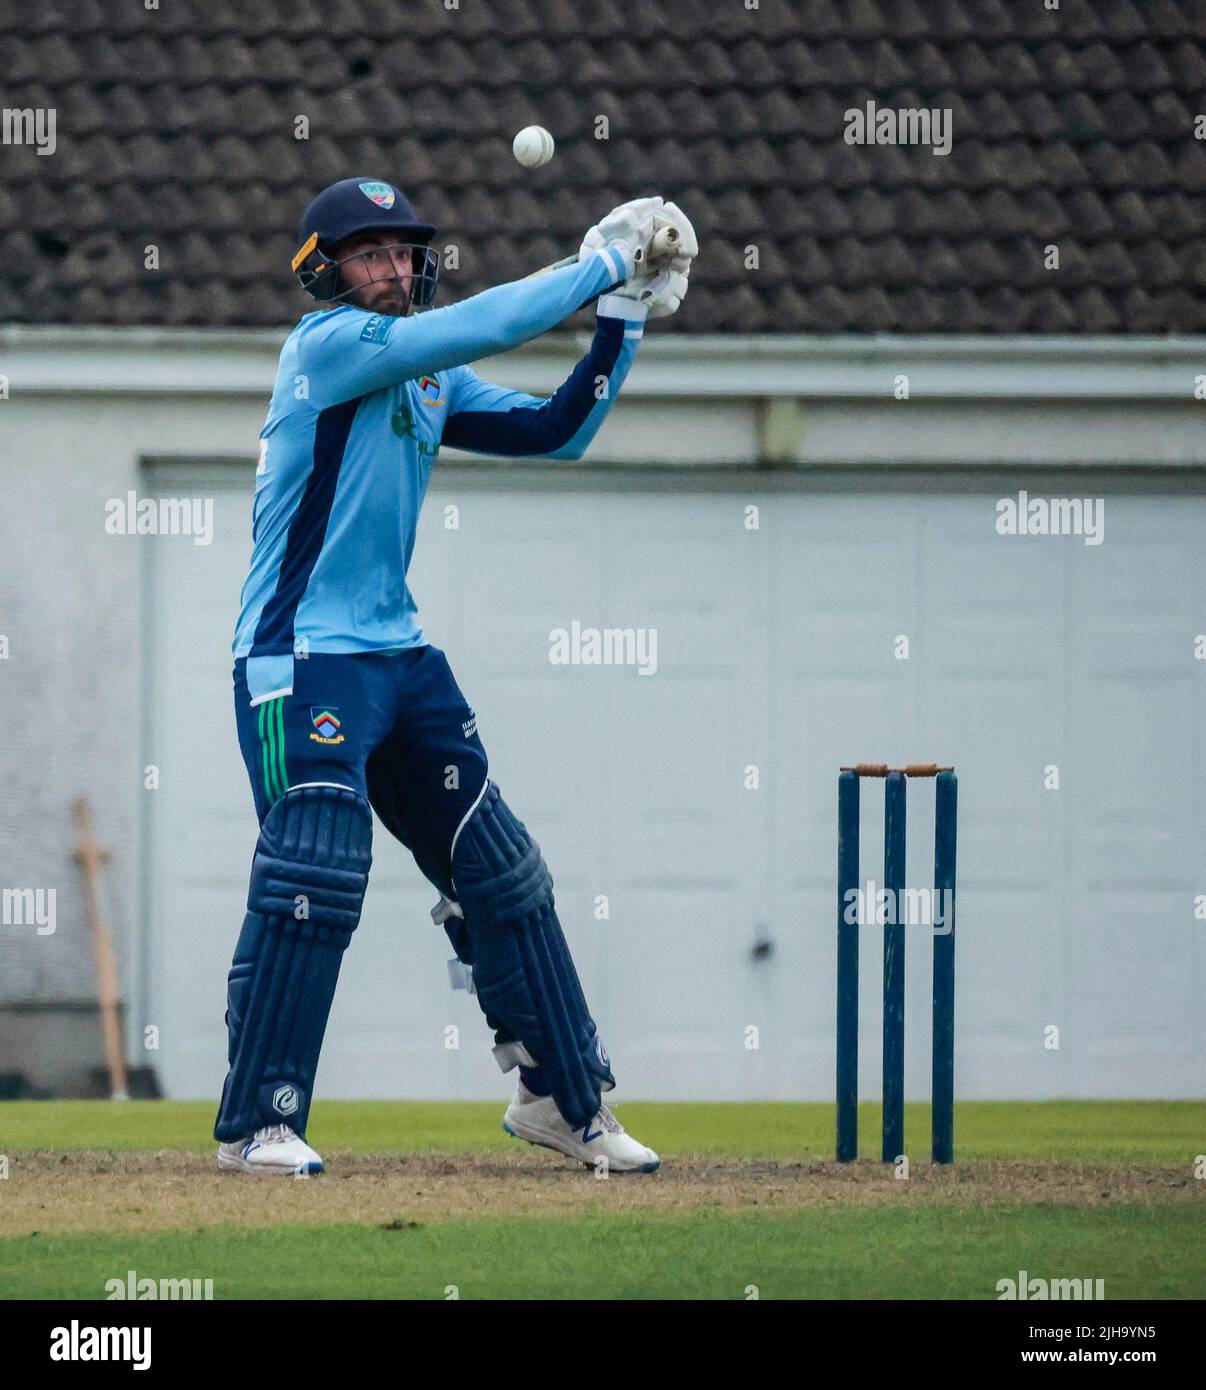 The Lawn, Waringstown, Northern Ireland, UK. 16 Jul 2022. The Lagan Valley Steels Twenty 20 Cup Final 2022. CIYMS v CSNI – CIYMS won by 16 runs (DLS) in a rain-affected match. Eyes on the ball from the CSNI batter as the ball rises sharply over the stumps. Credit: David Hunter/Alamy Live News. Stock Photo